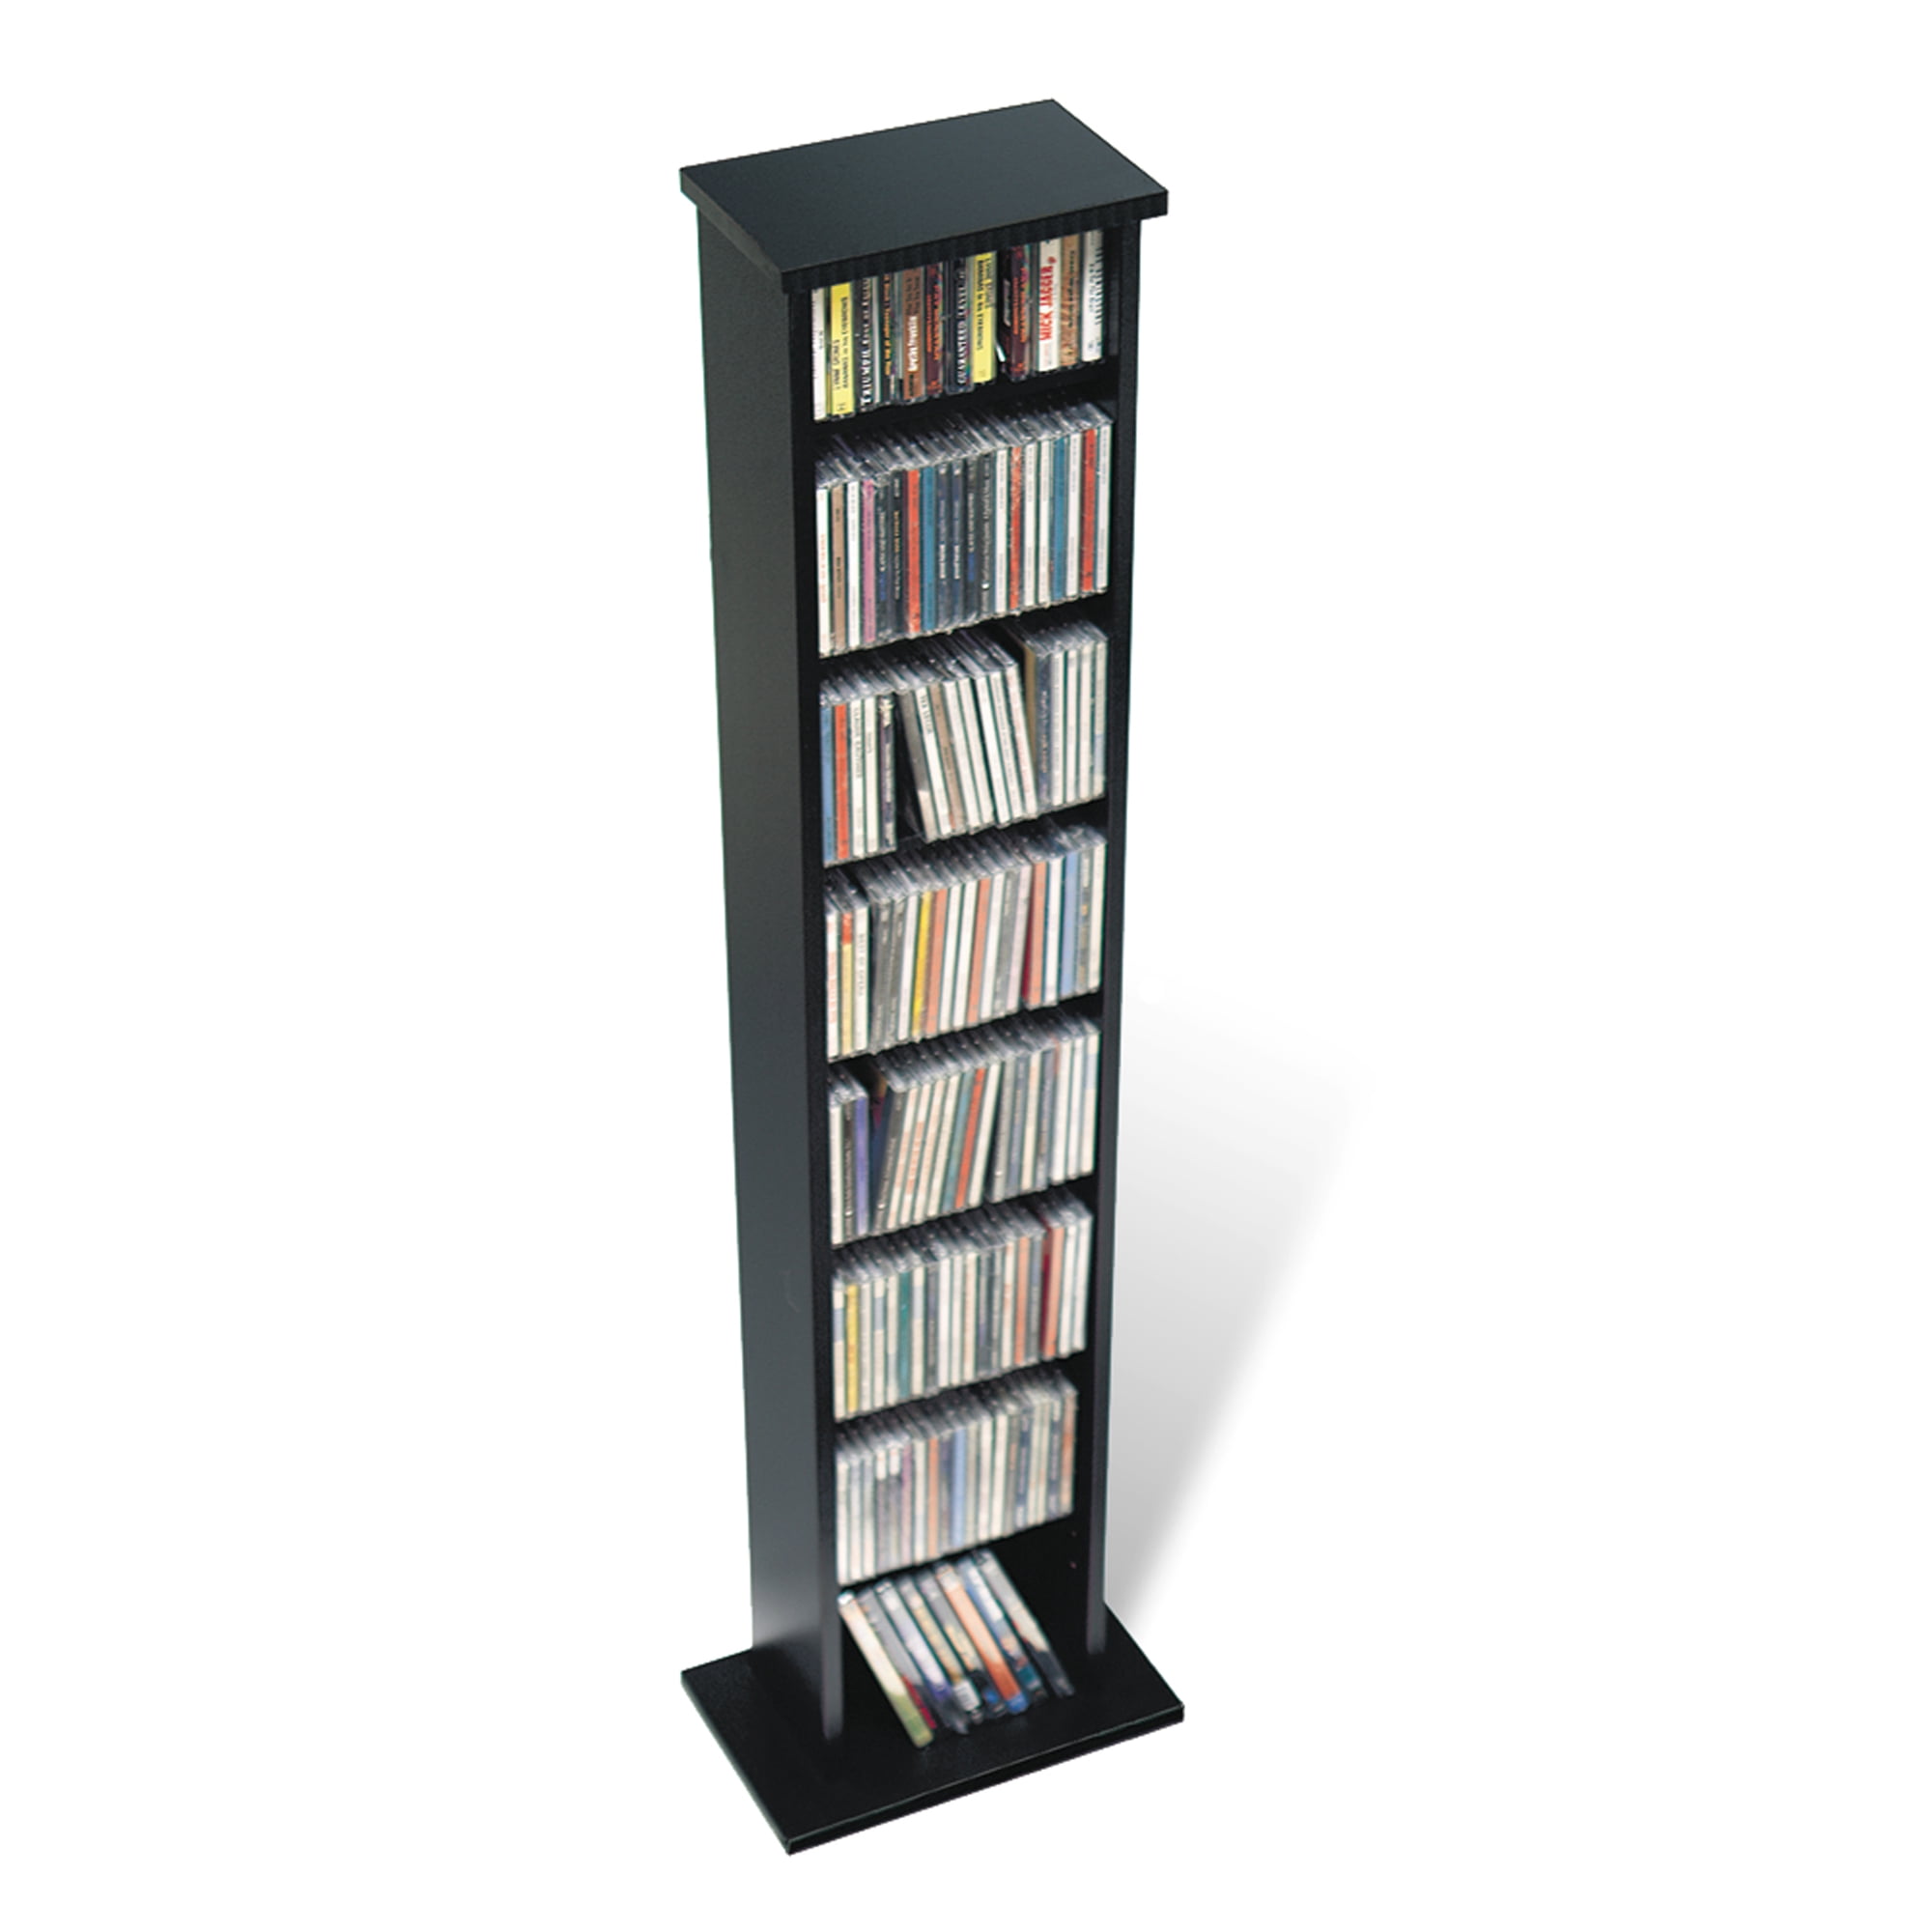 Atlantic Summit Adjustable Media Cabinet 6 Adjustable and 3 Fixed Shelves PN74735728 in Maple Holds 261 CDs 114 DVDs or 132 Blu-Rays 